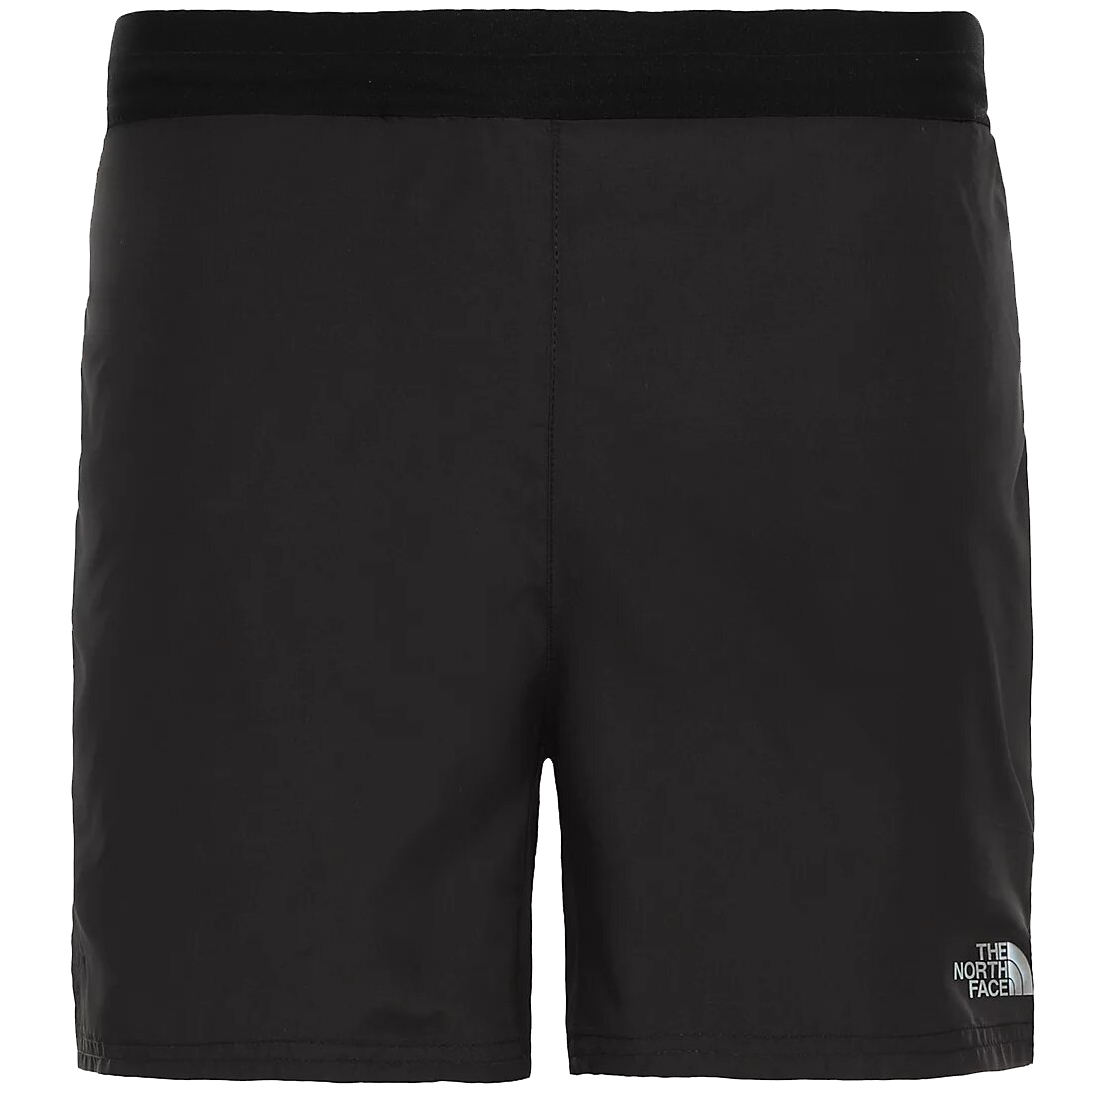 THE NORTH FACE M AMBITION SHORT FW20 